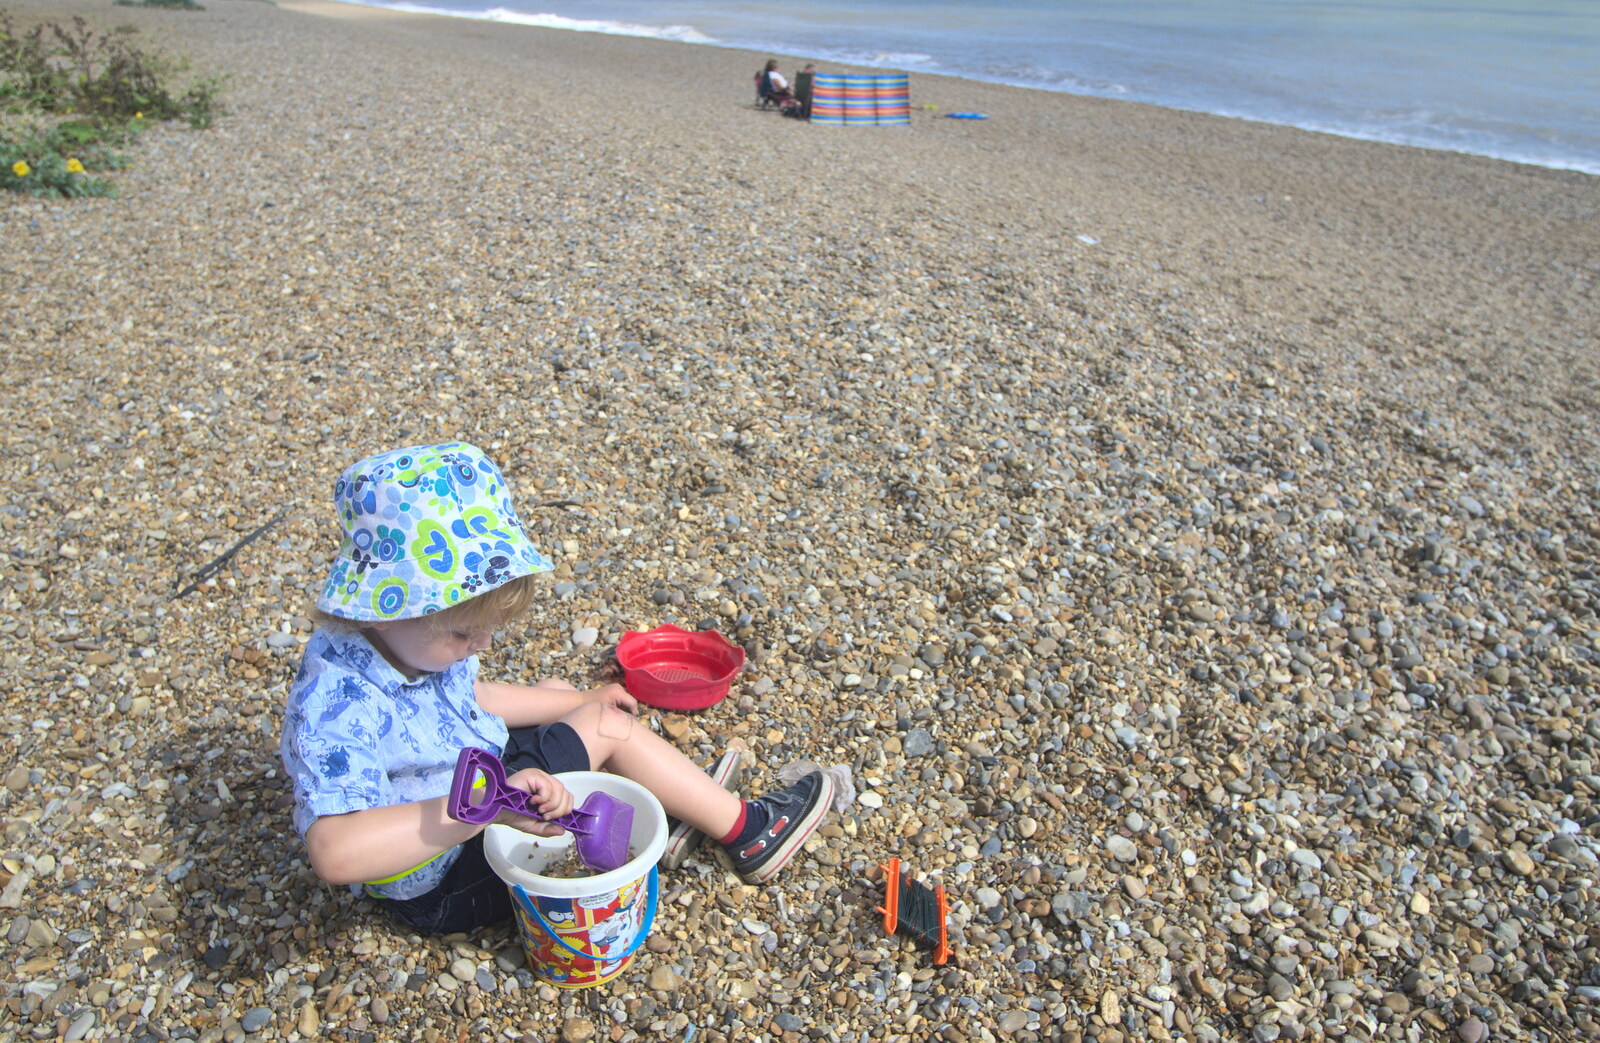 Back on the beach on a sunnier day from Camping by the Seaside, Cliff House, Dunwich, Suffolk - 15th August 2012